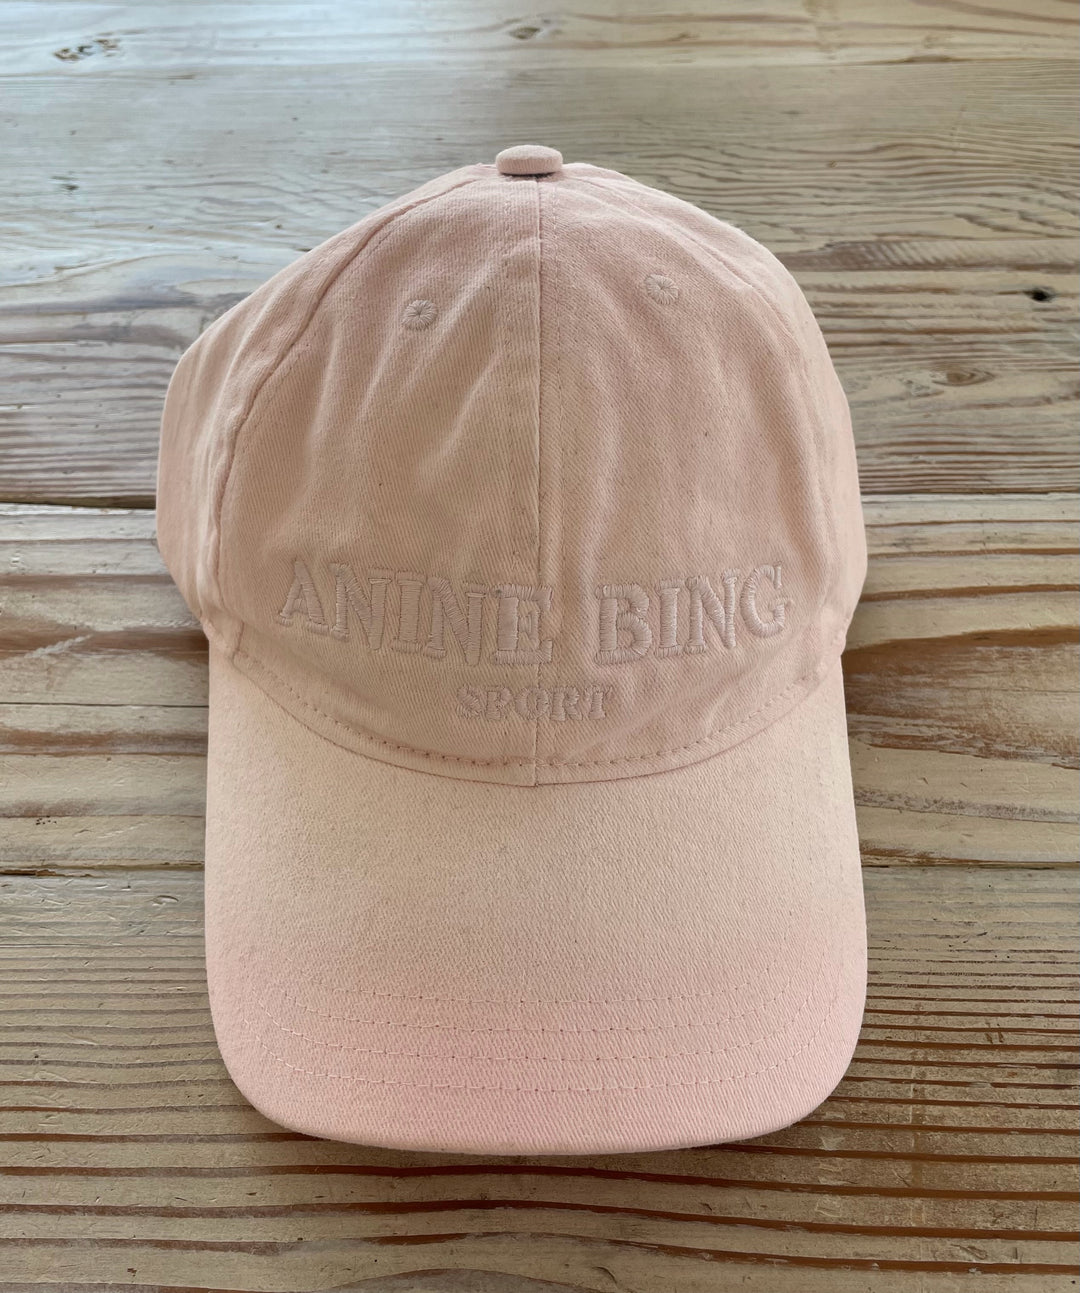 Anine Bing - Jeremy Baseball Cap in Washed Pink